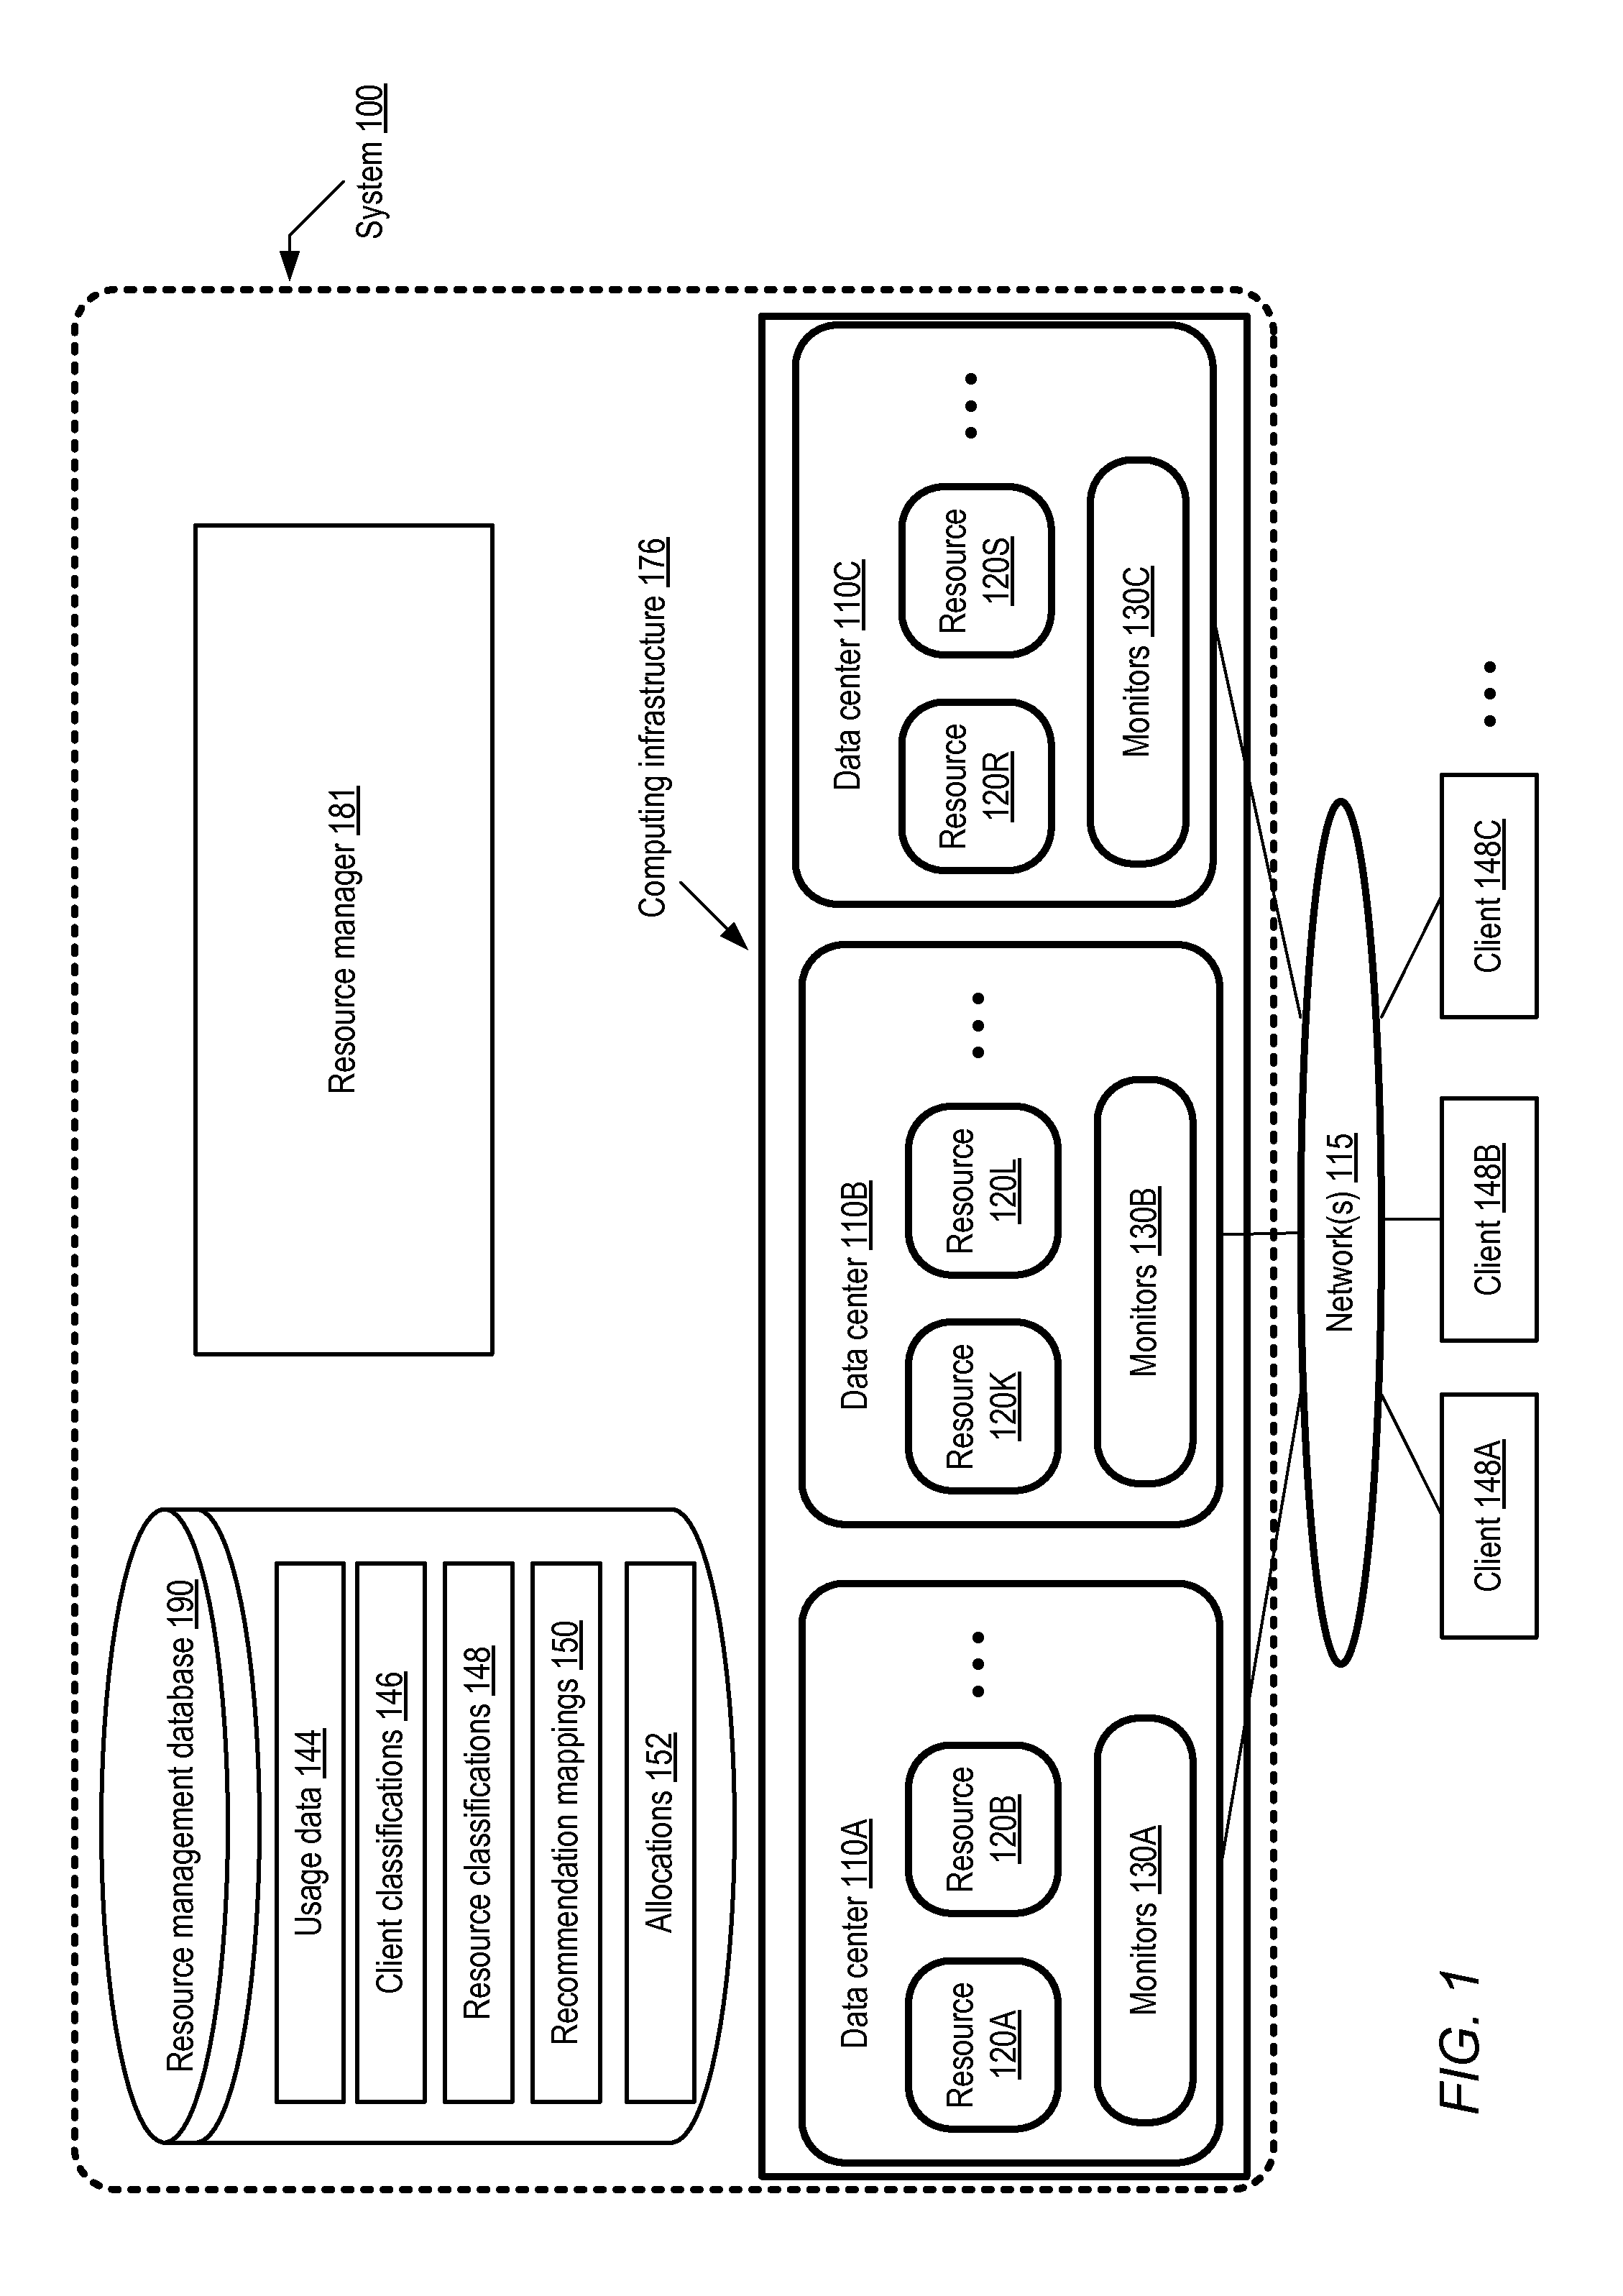 Client Classification-Based Dynamic Allocation of Computing Infrastructure Resources